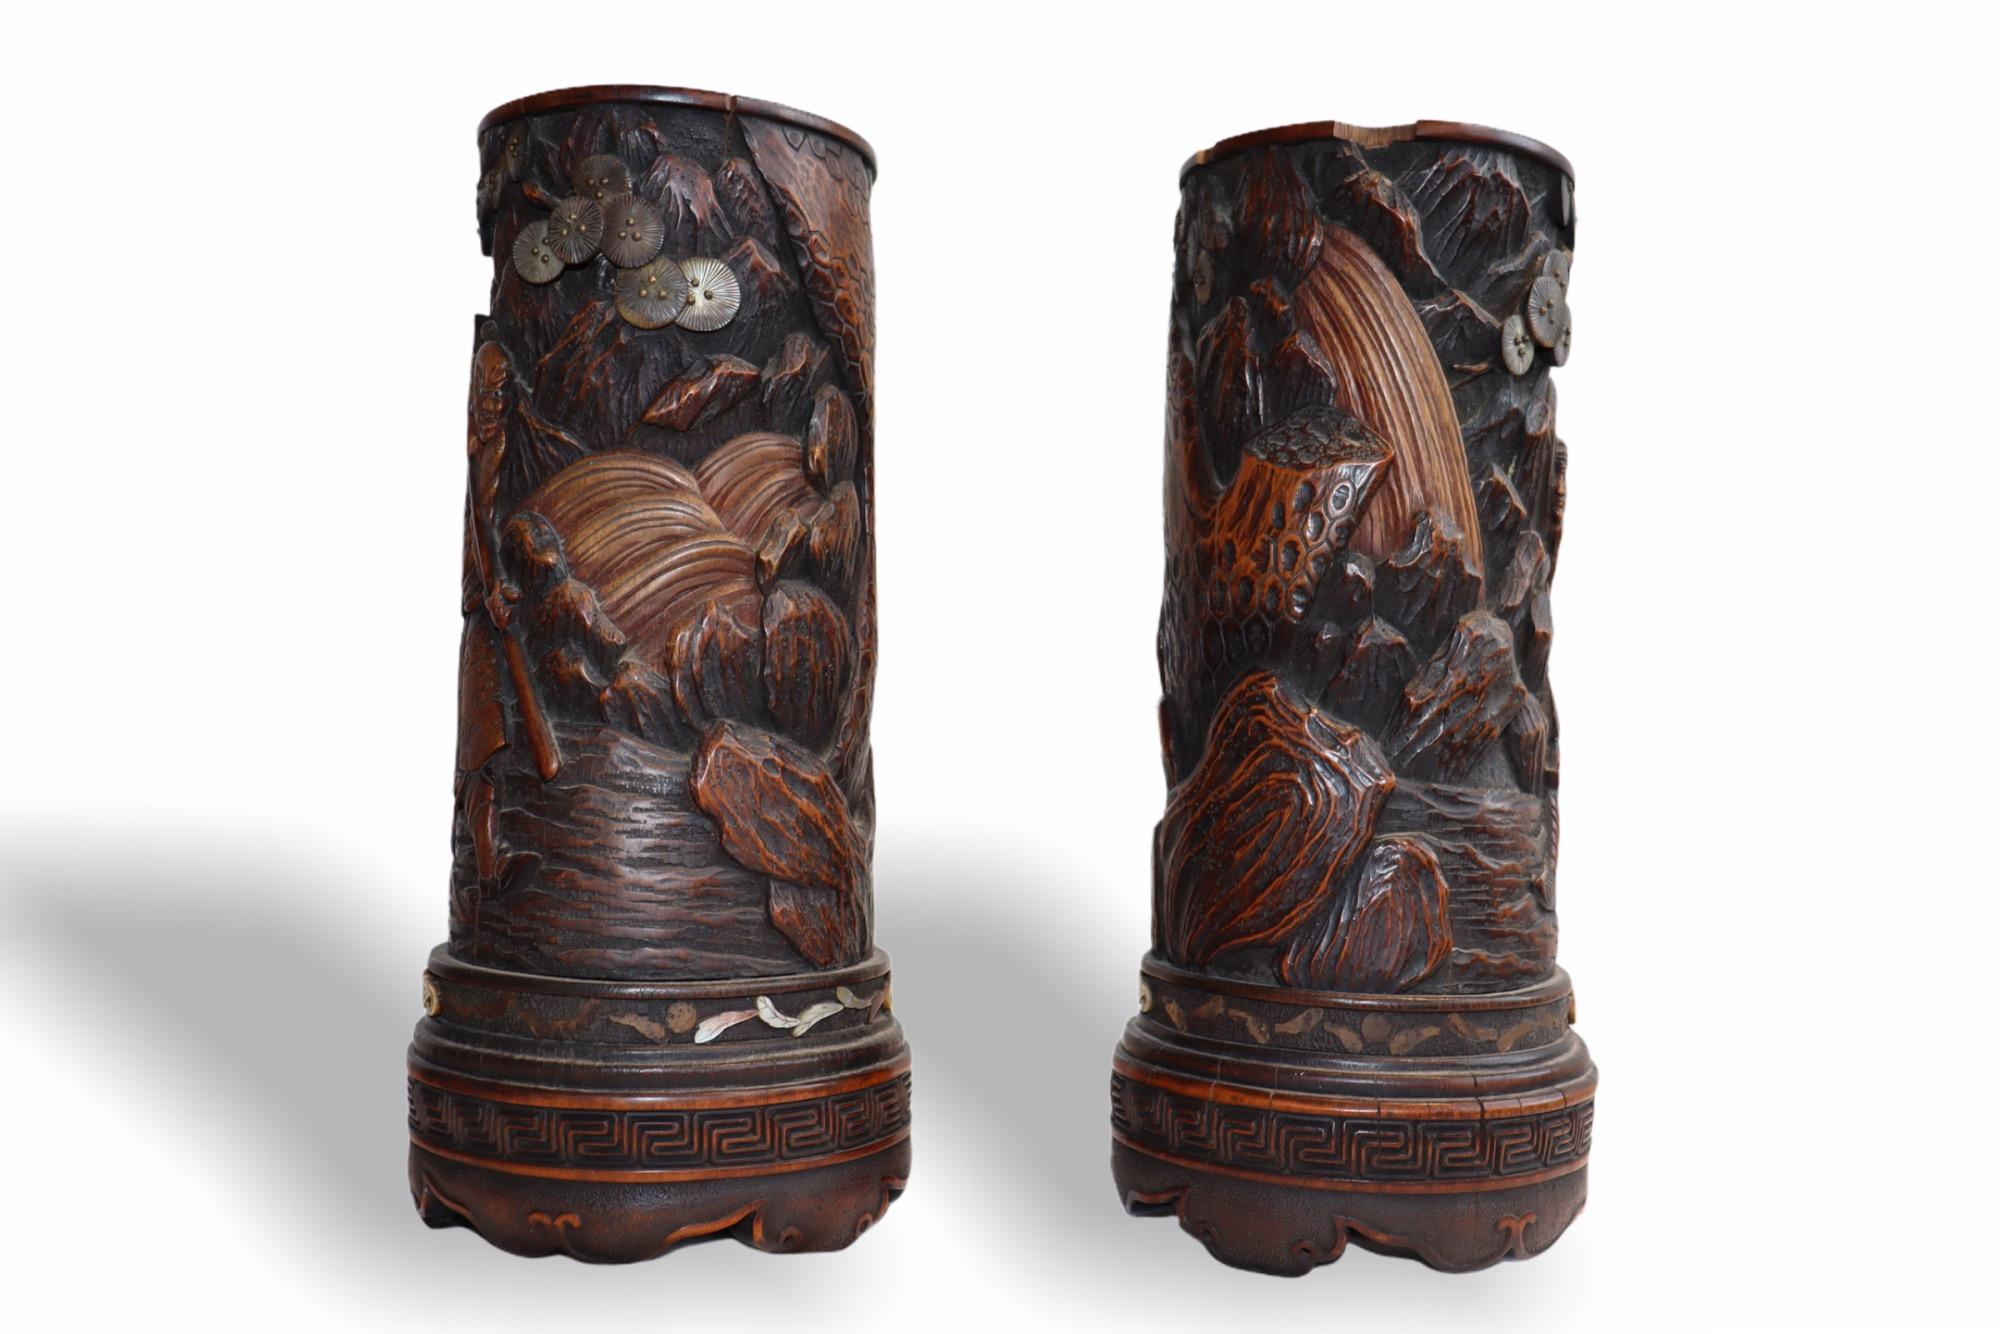 Woodwork Monumental Pair of Chinese Carved Wood Brush Pots, Late 18th Century